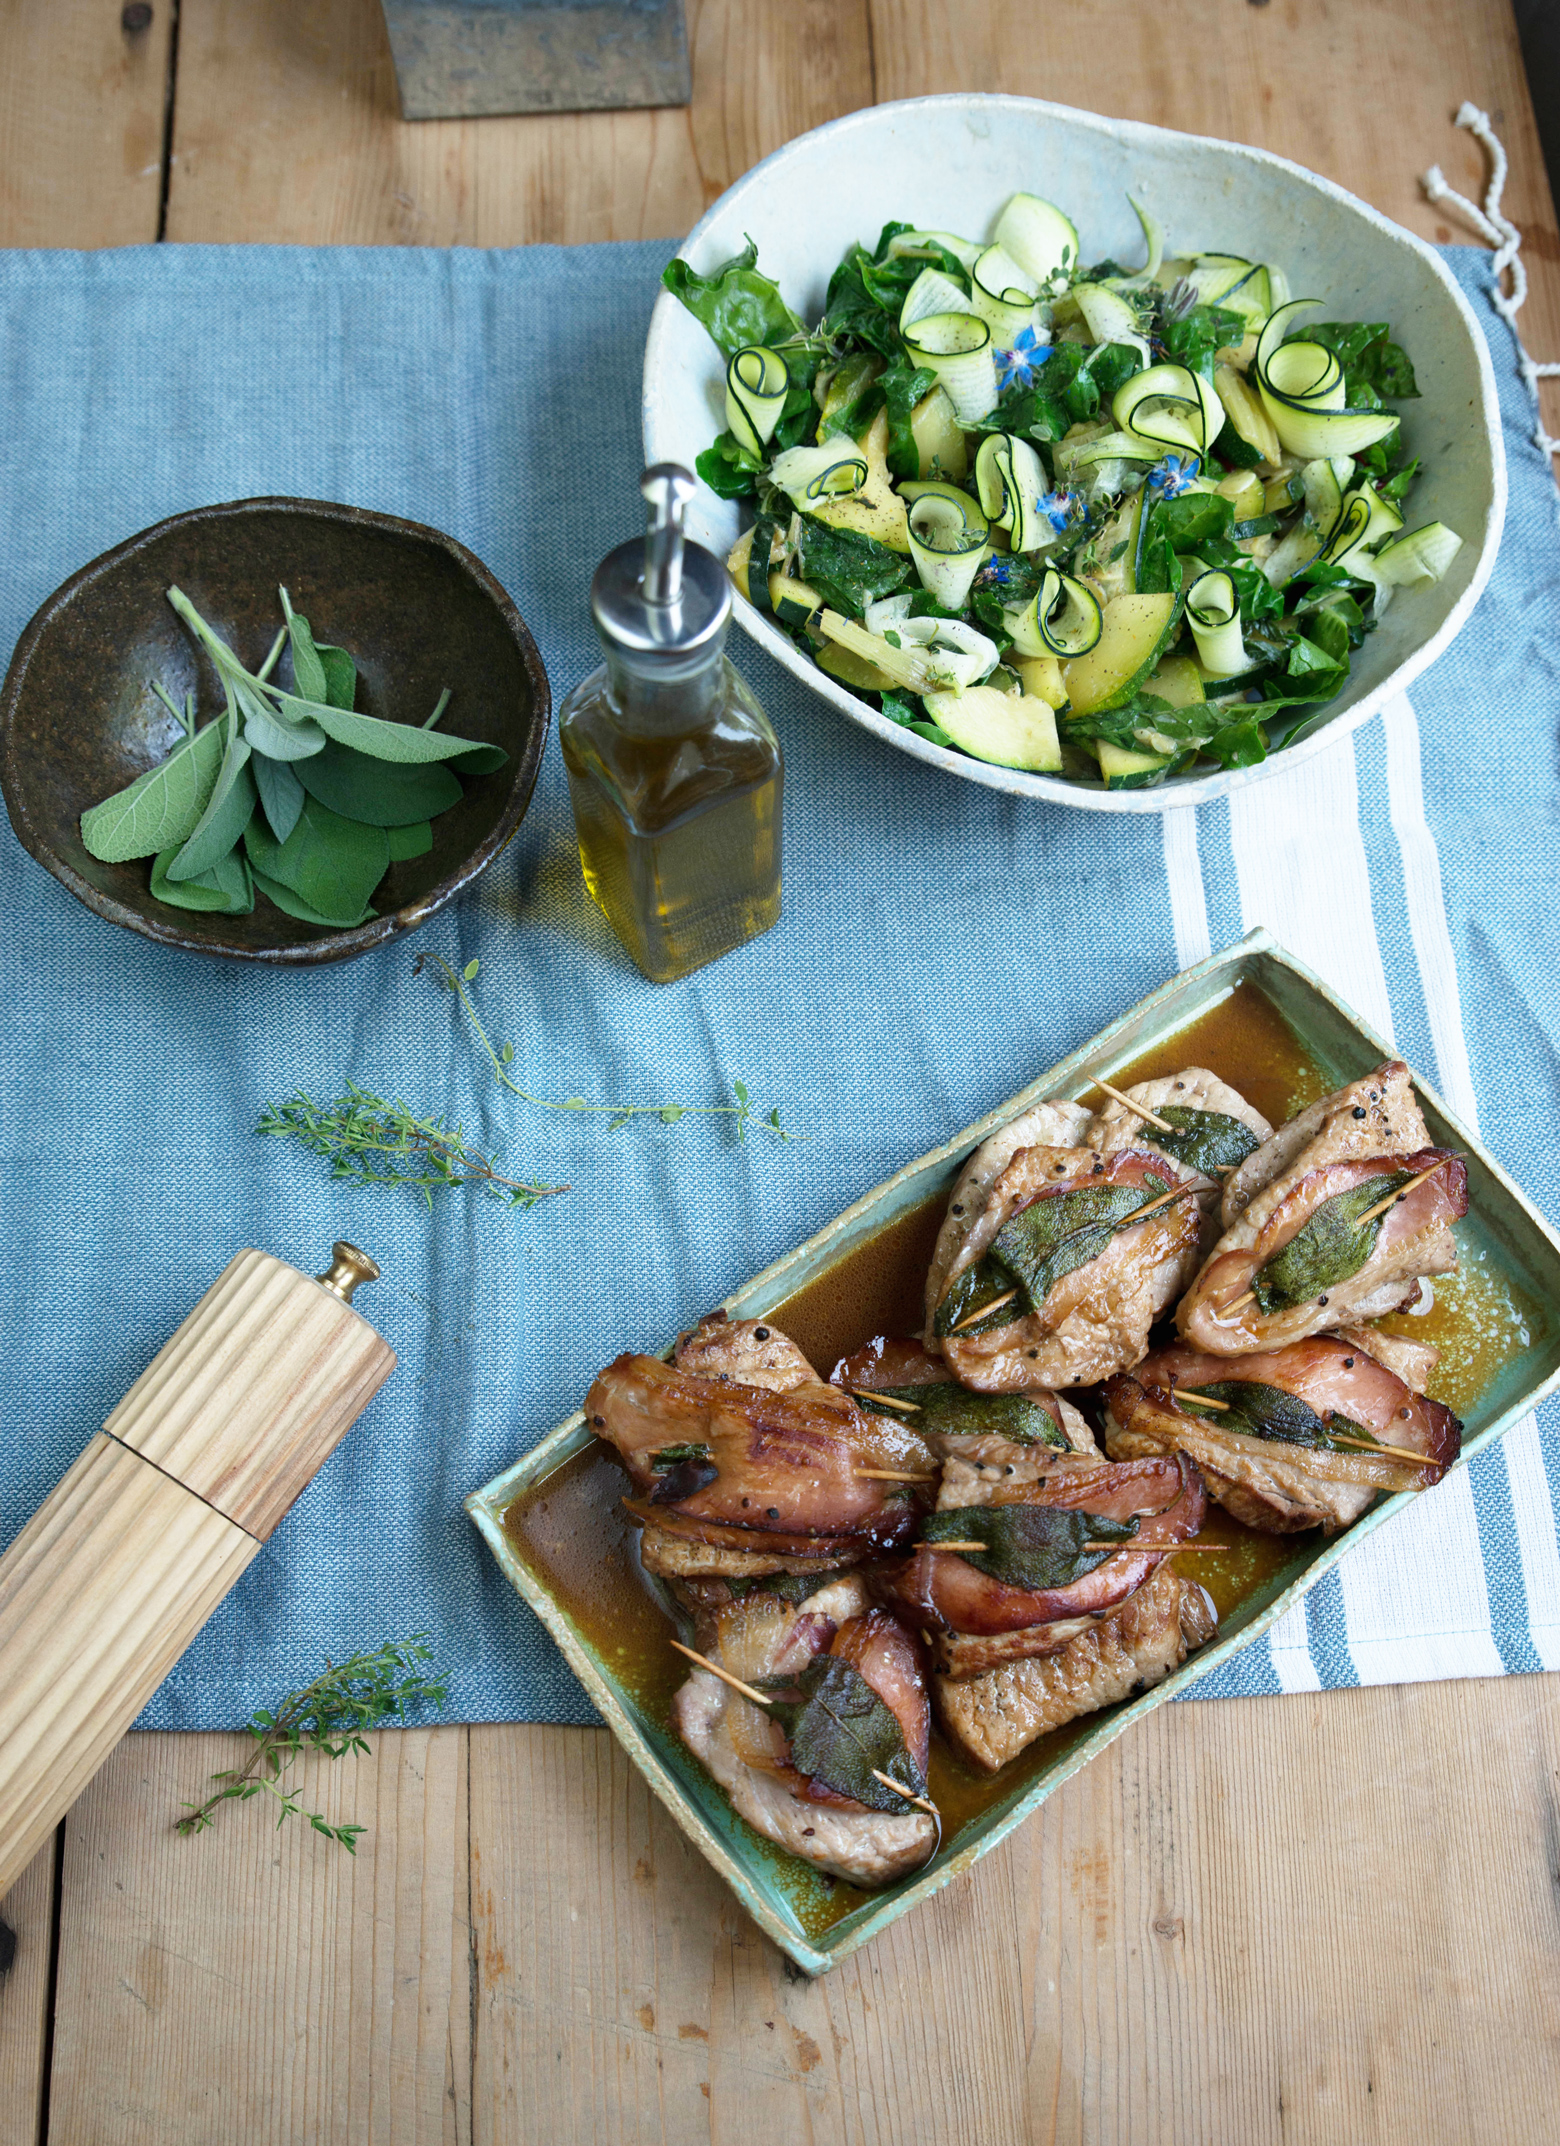 You are currently viewing Saltimbocca mit Zucchini-Mangoldgemüse